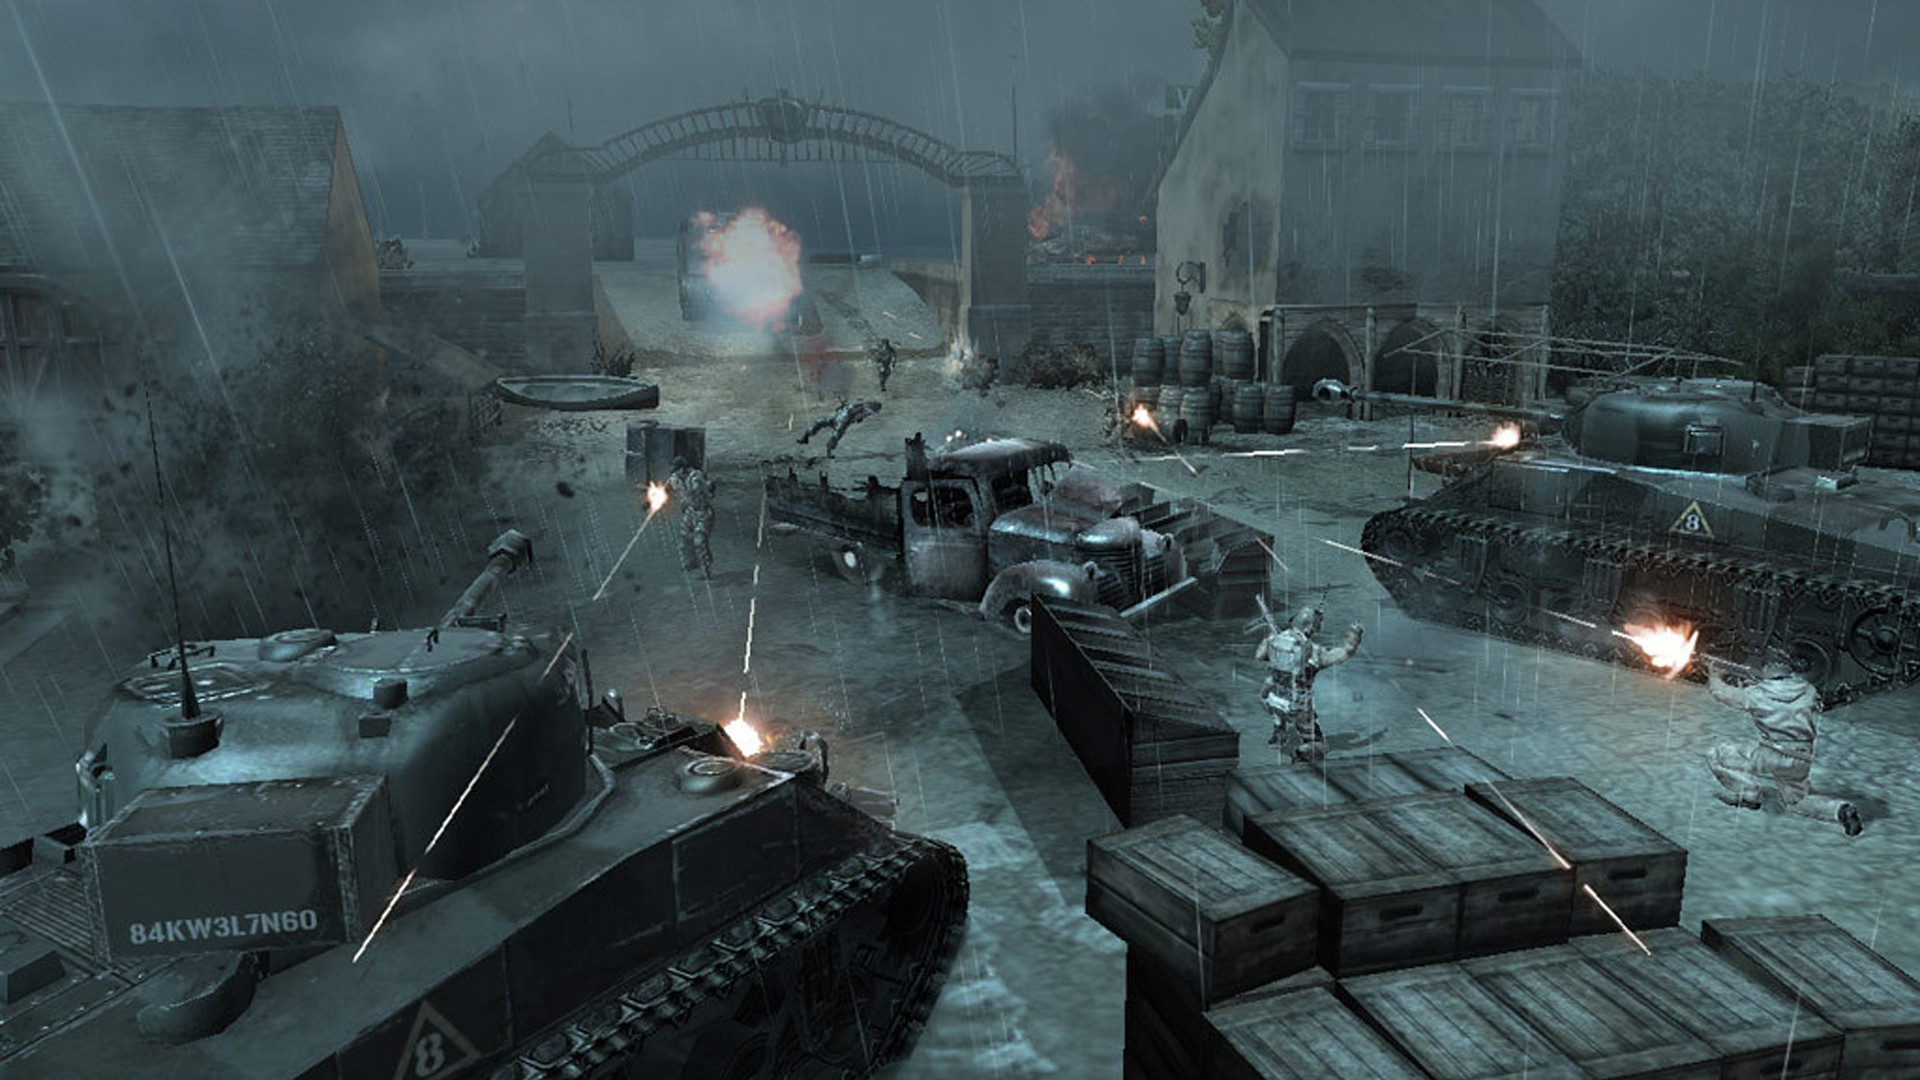 company of heroes updates download